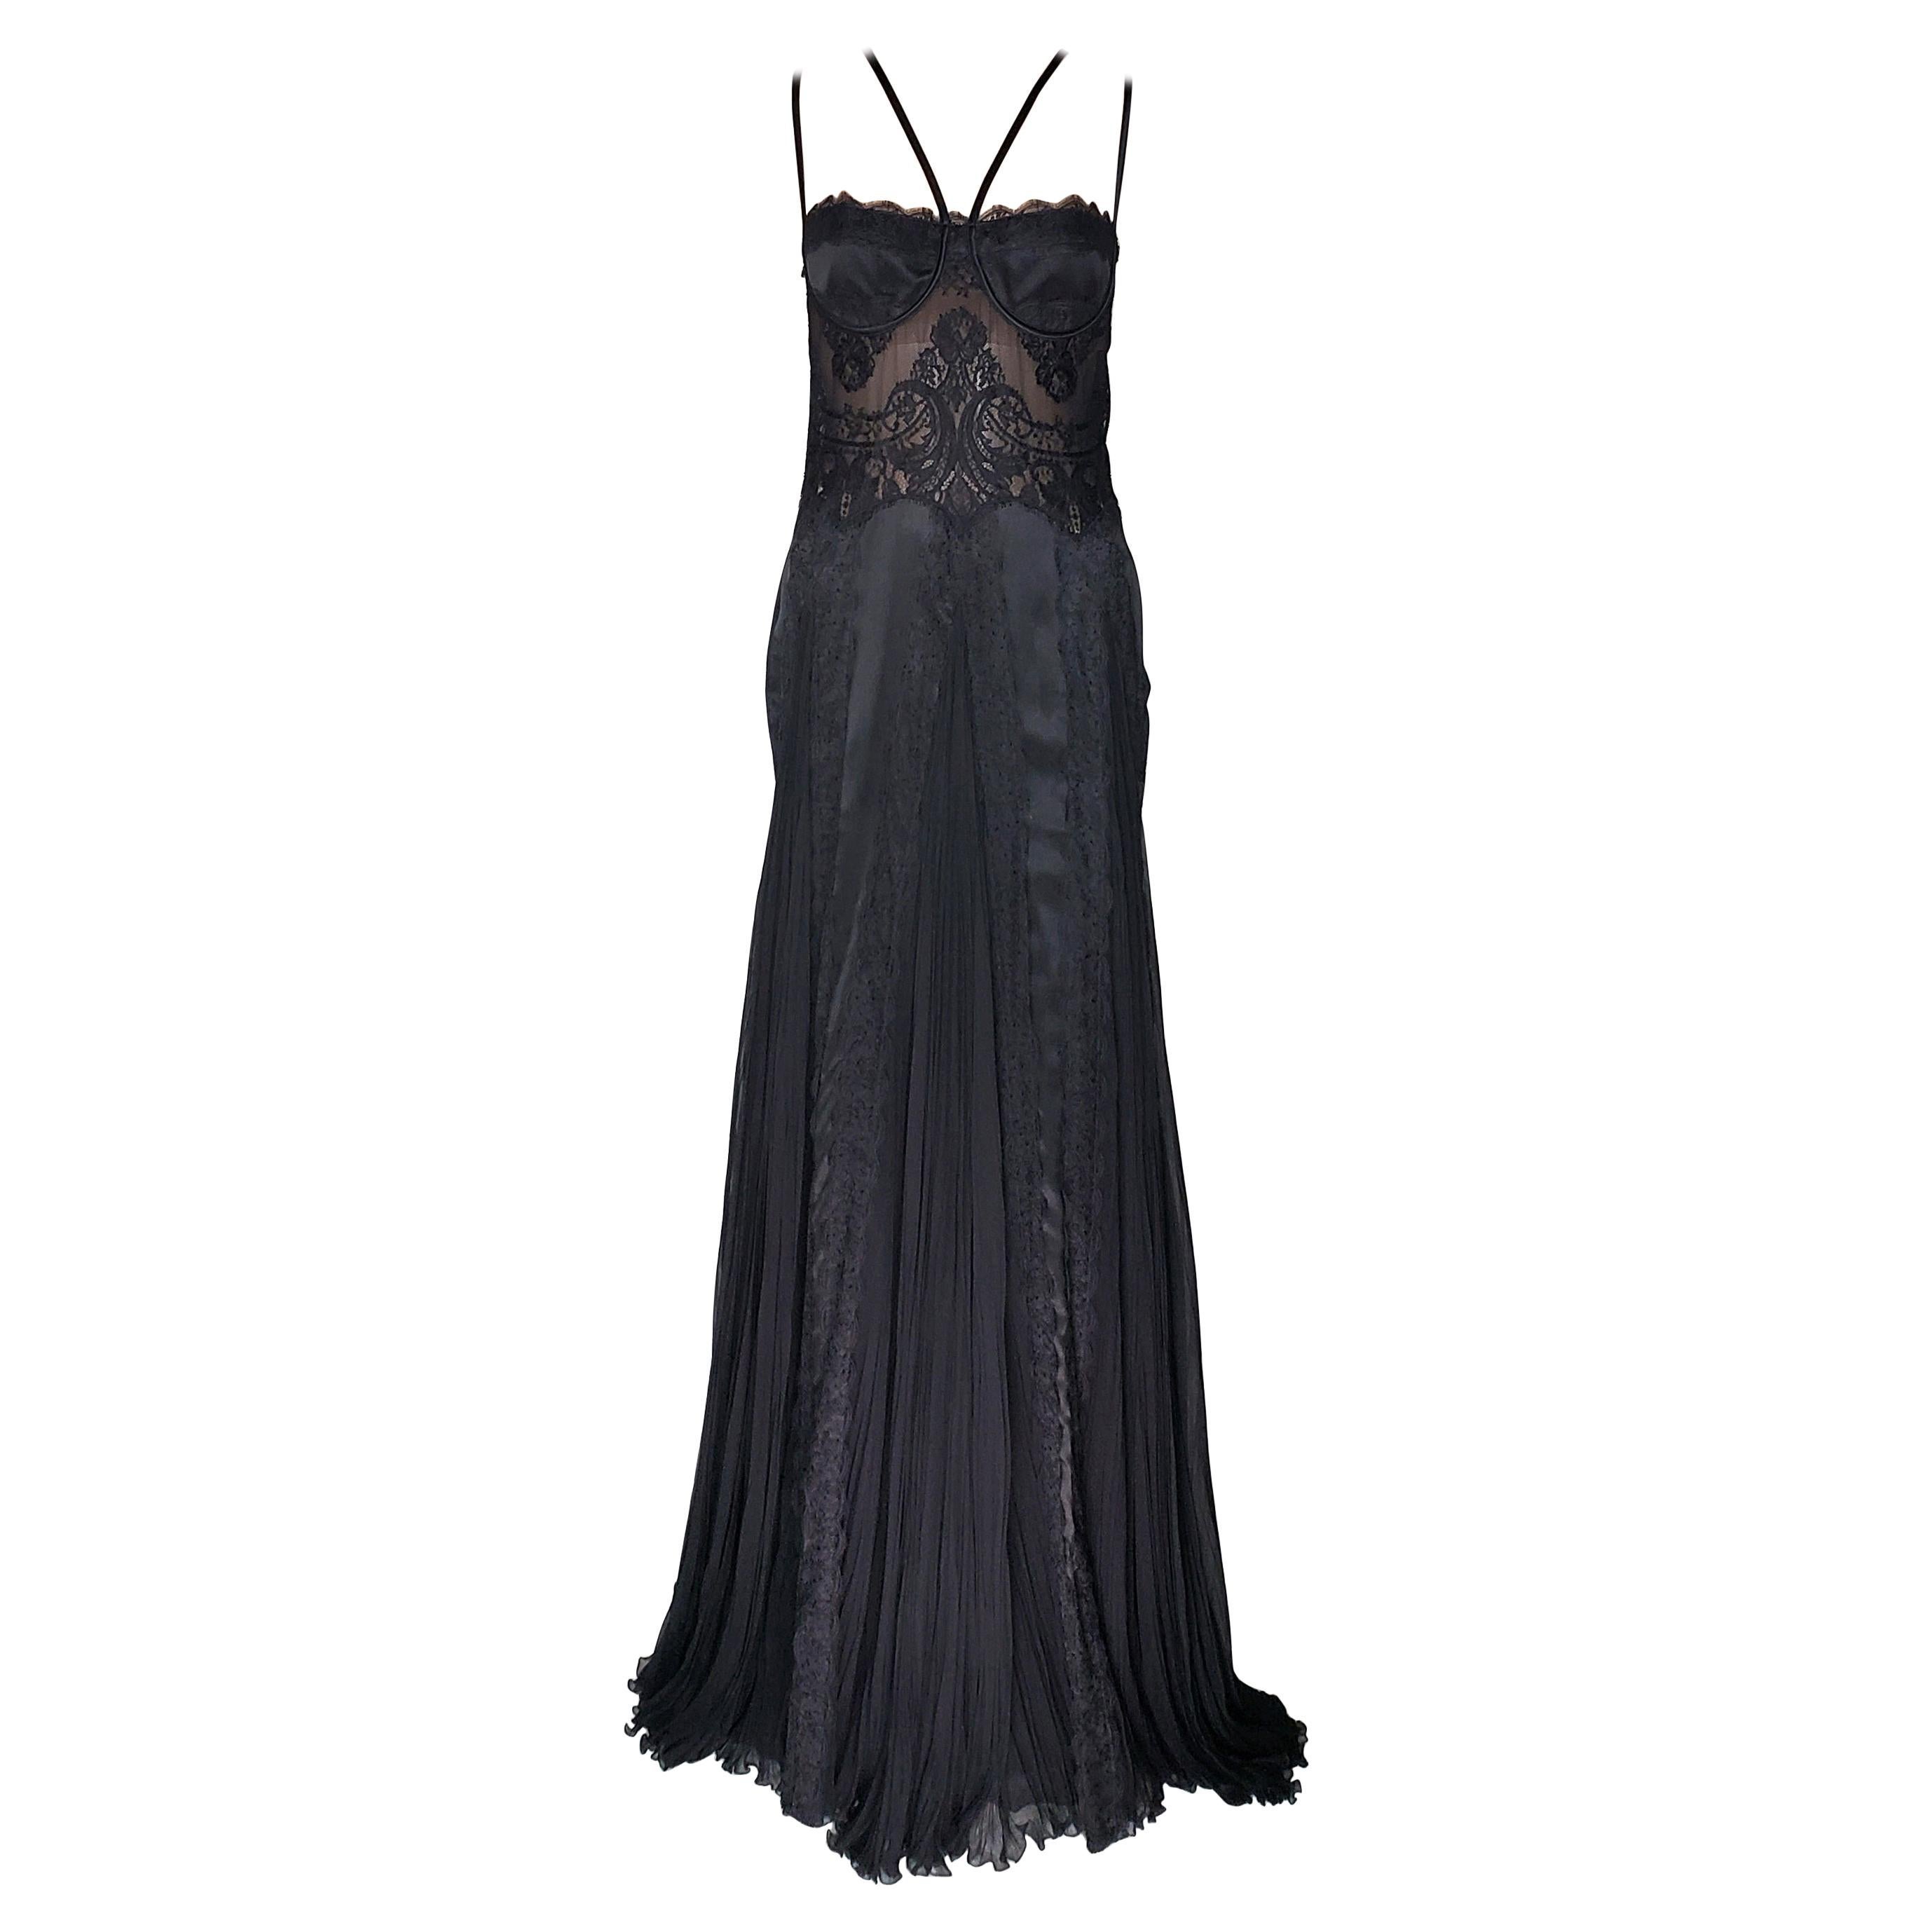 Fall 2003/2004 VINTAGE VERSACE BLACK SILK DRESS GOWN W/SHEER LACE Bodice  For Sale